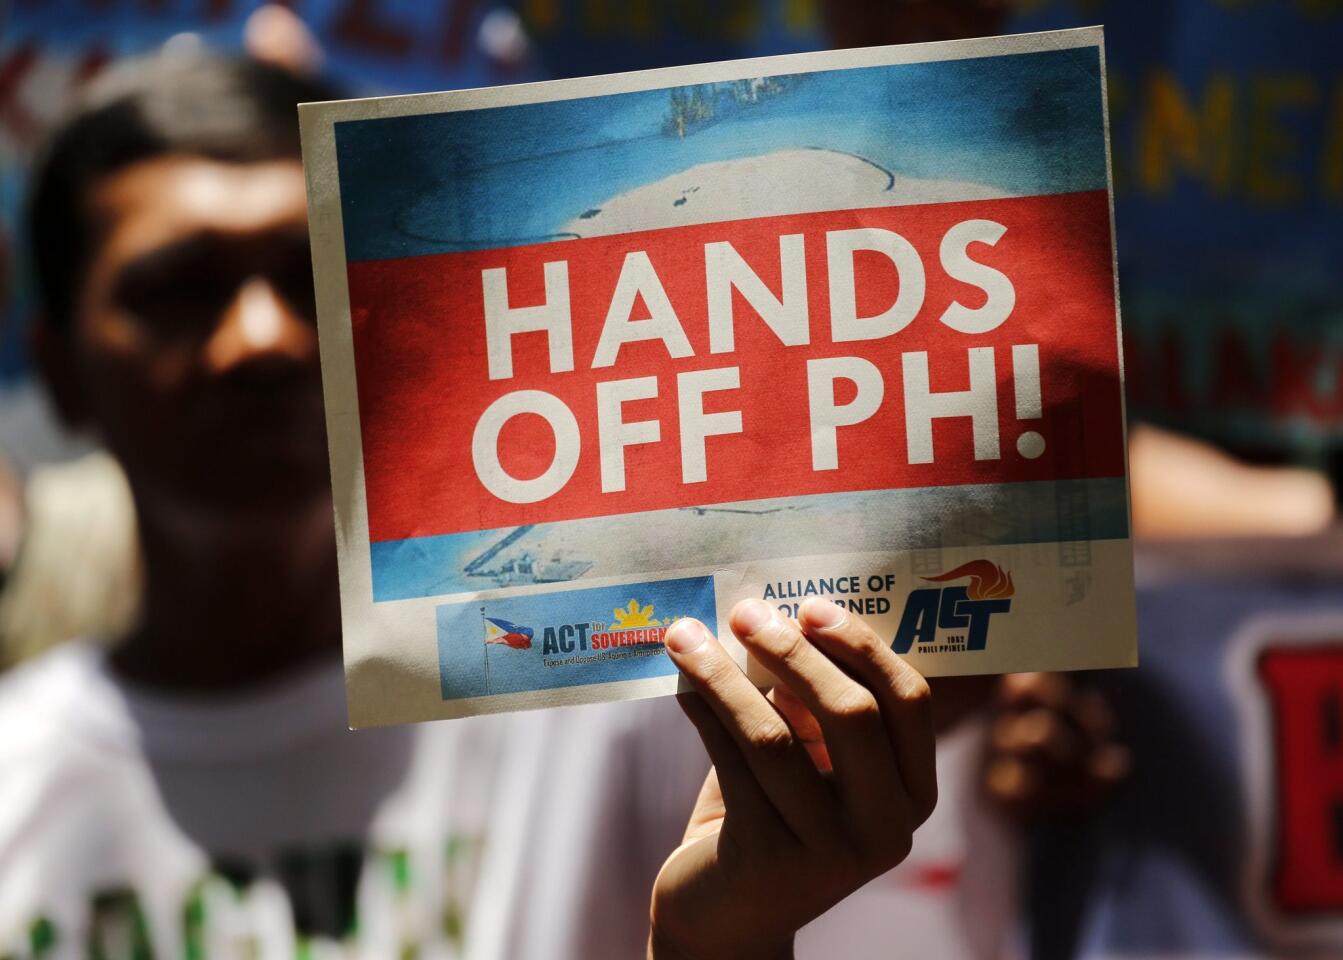 A Filipino holds a placard reading "Hands Off PH!" while protesting outside the Chinese consular office in Makati, near Manilla, against China's territorial claims over the disputed Spratly Islands.